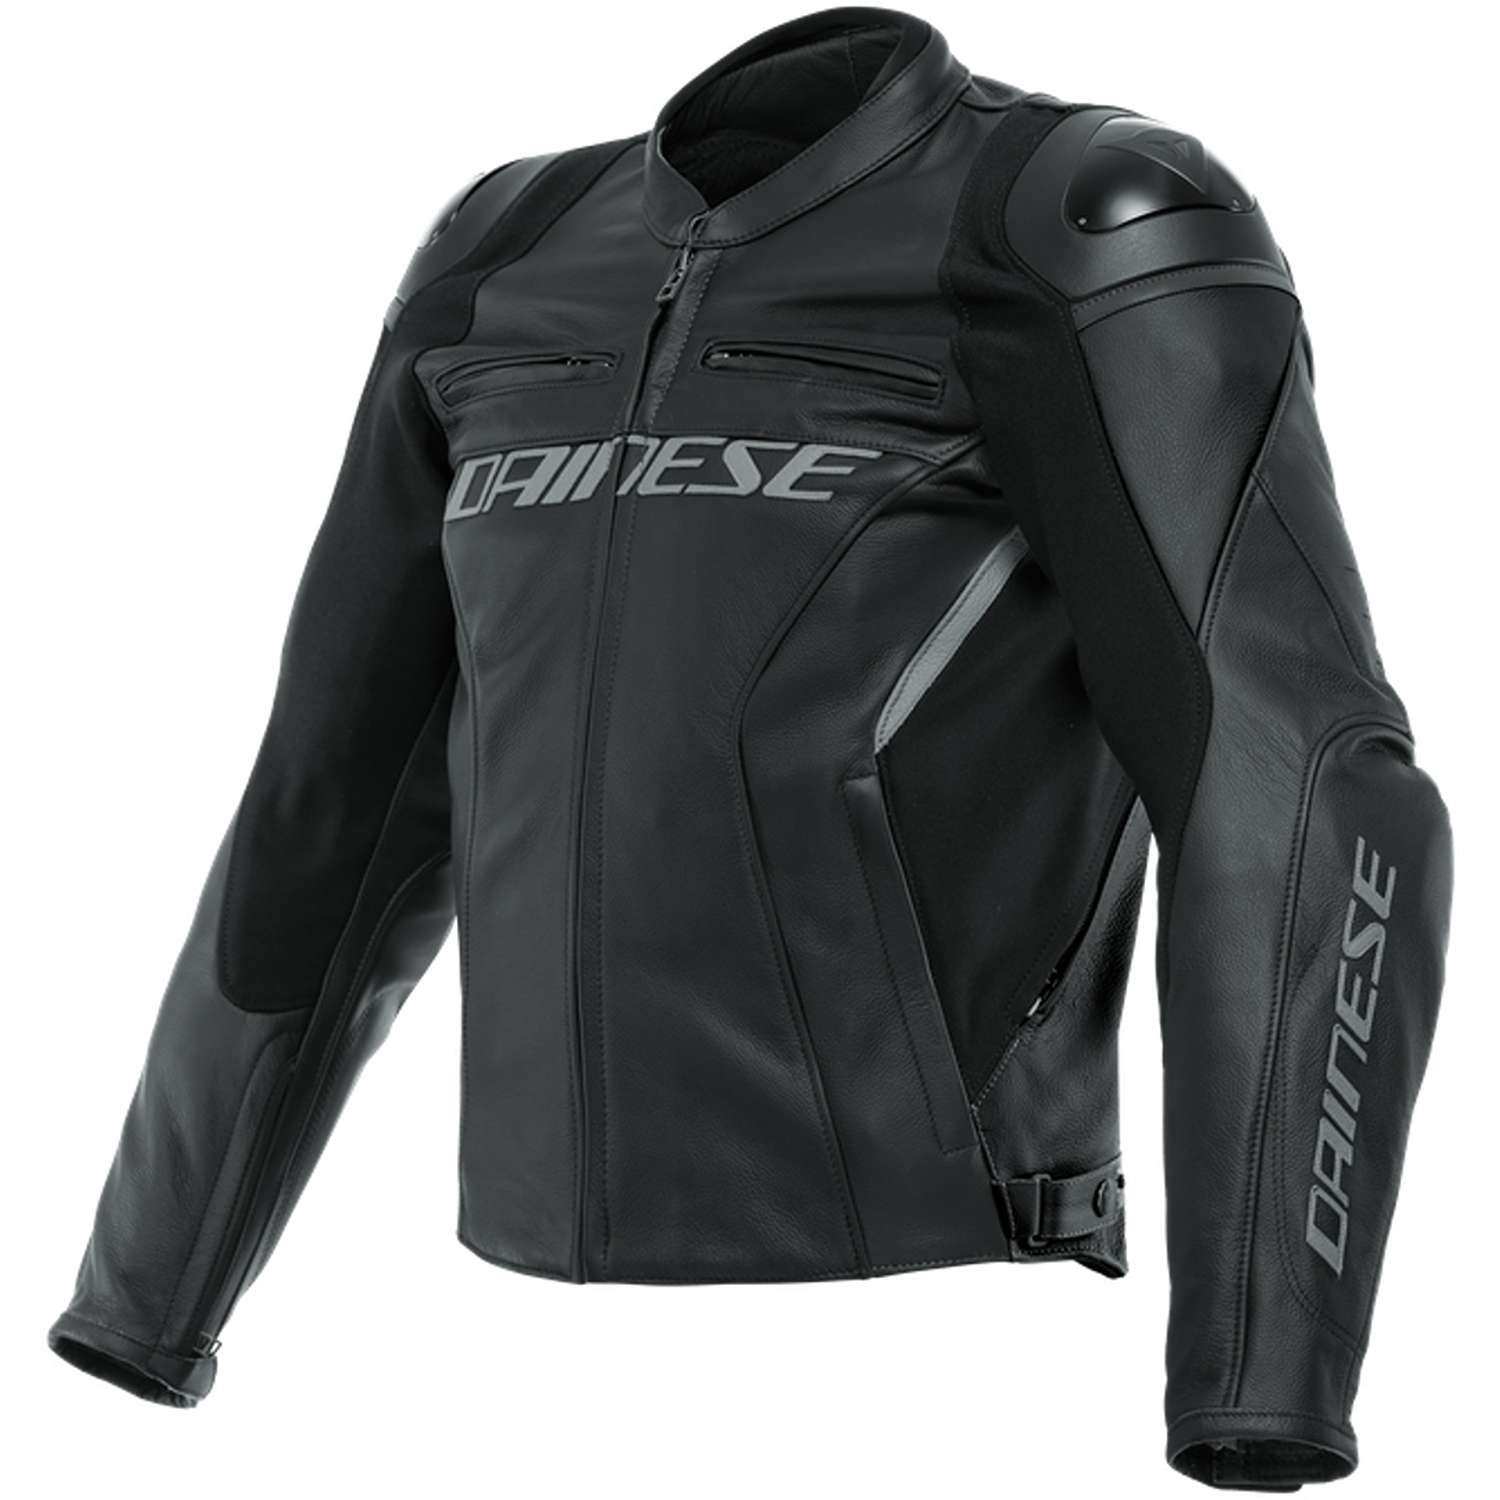 Image of EU Dainese Racing 4 Leather Jacket S/T Black Black Taille 26